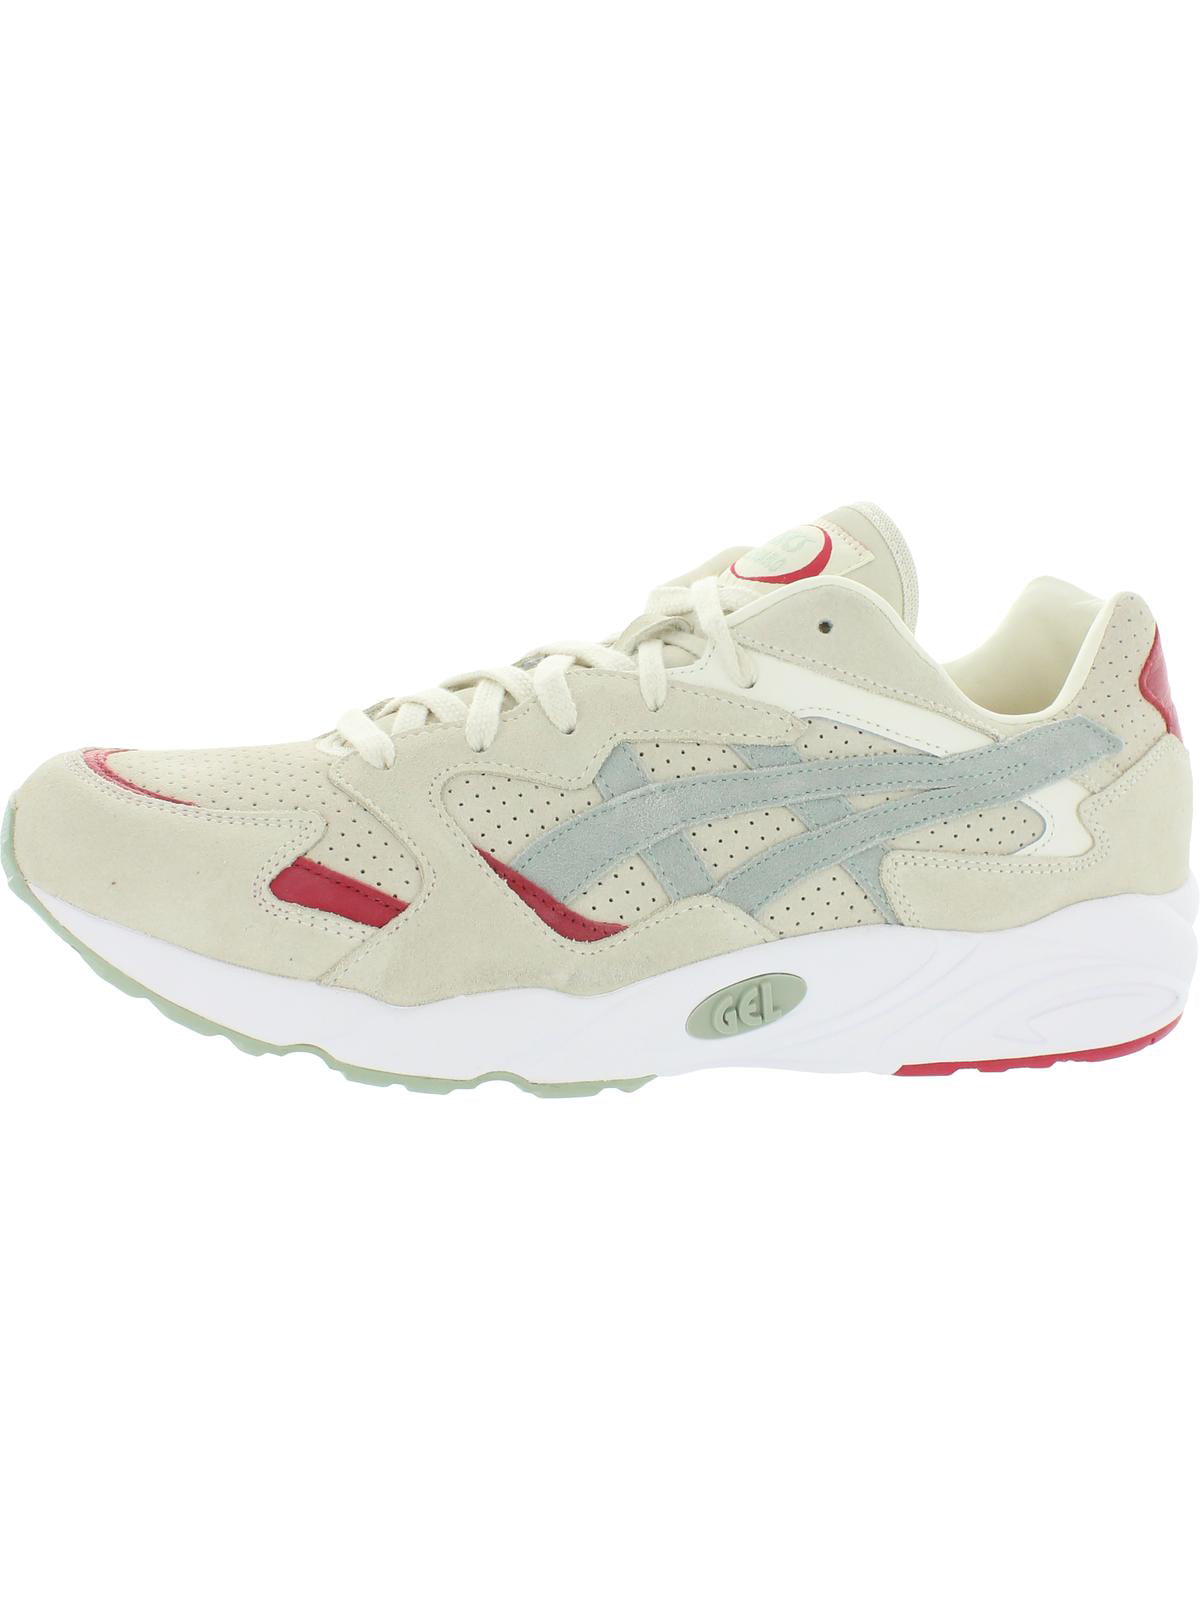 asics leather mens shoes